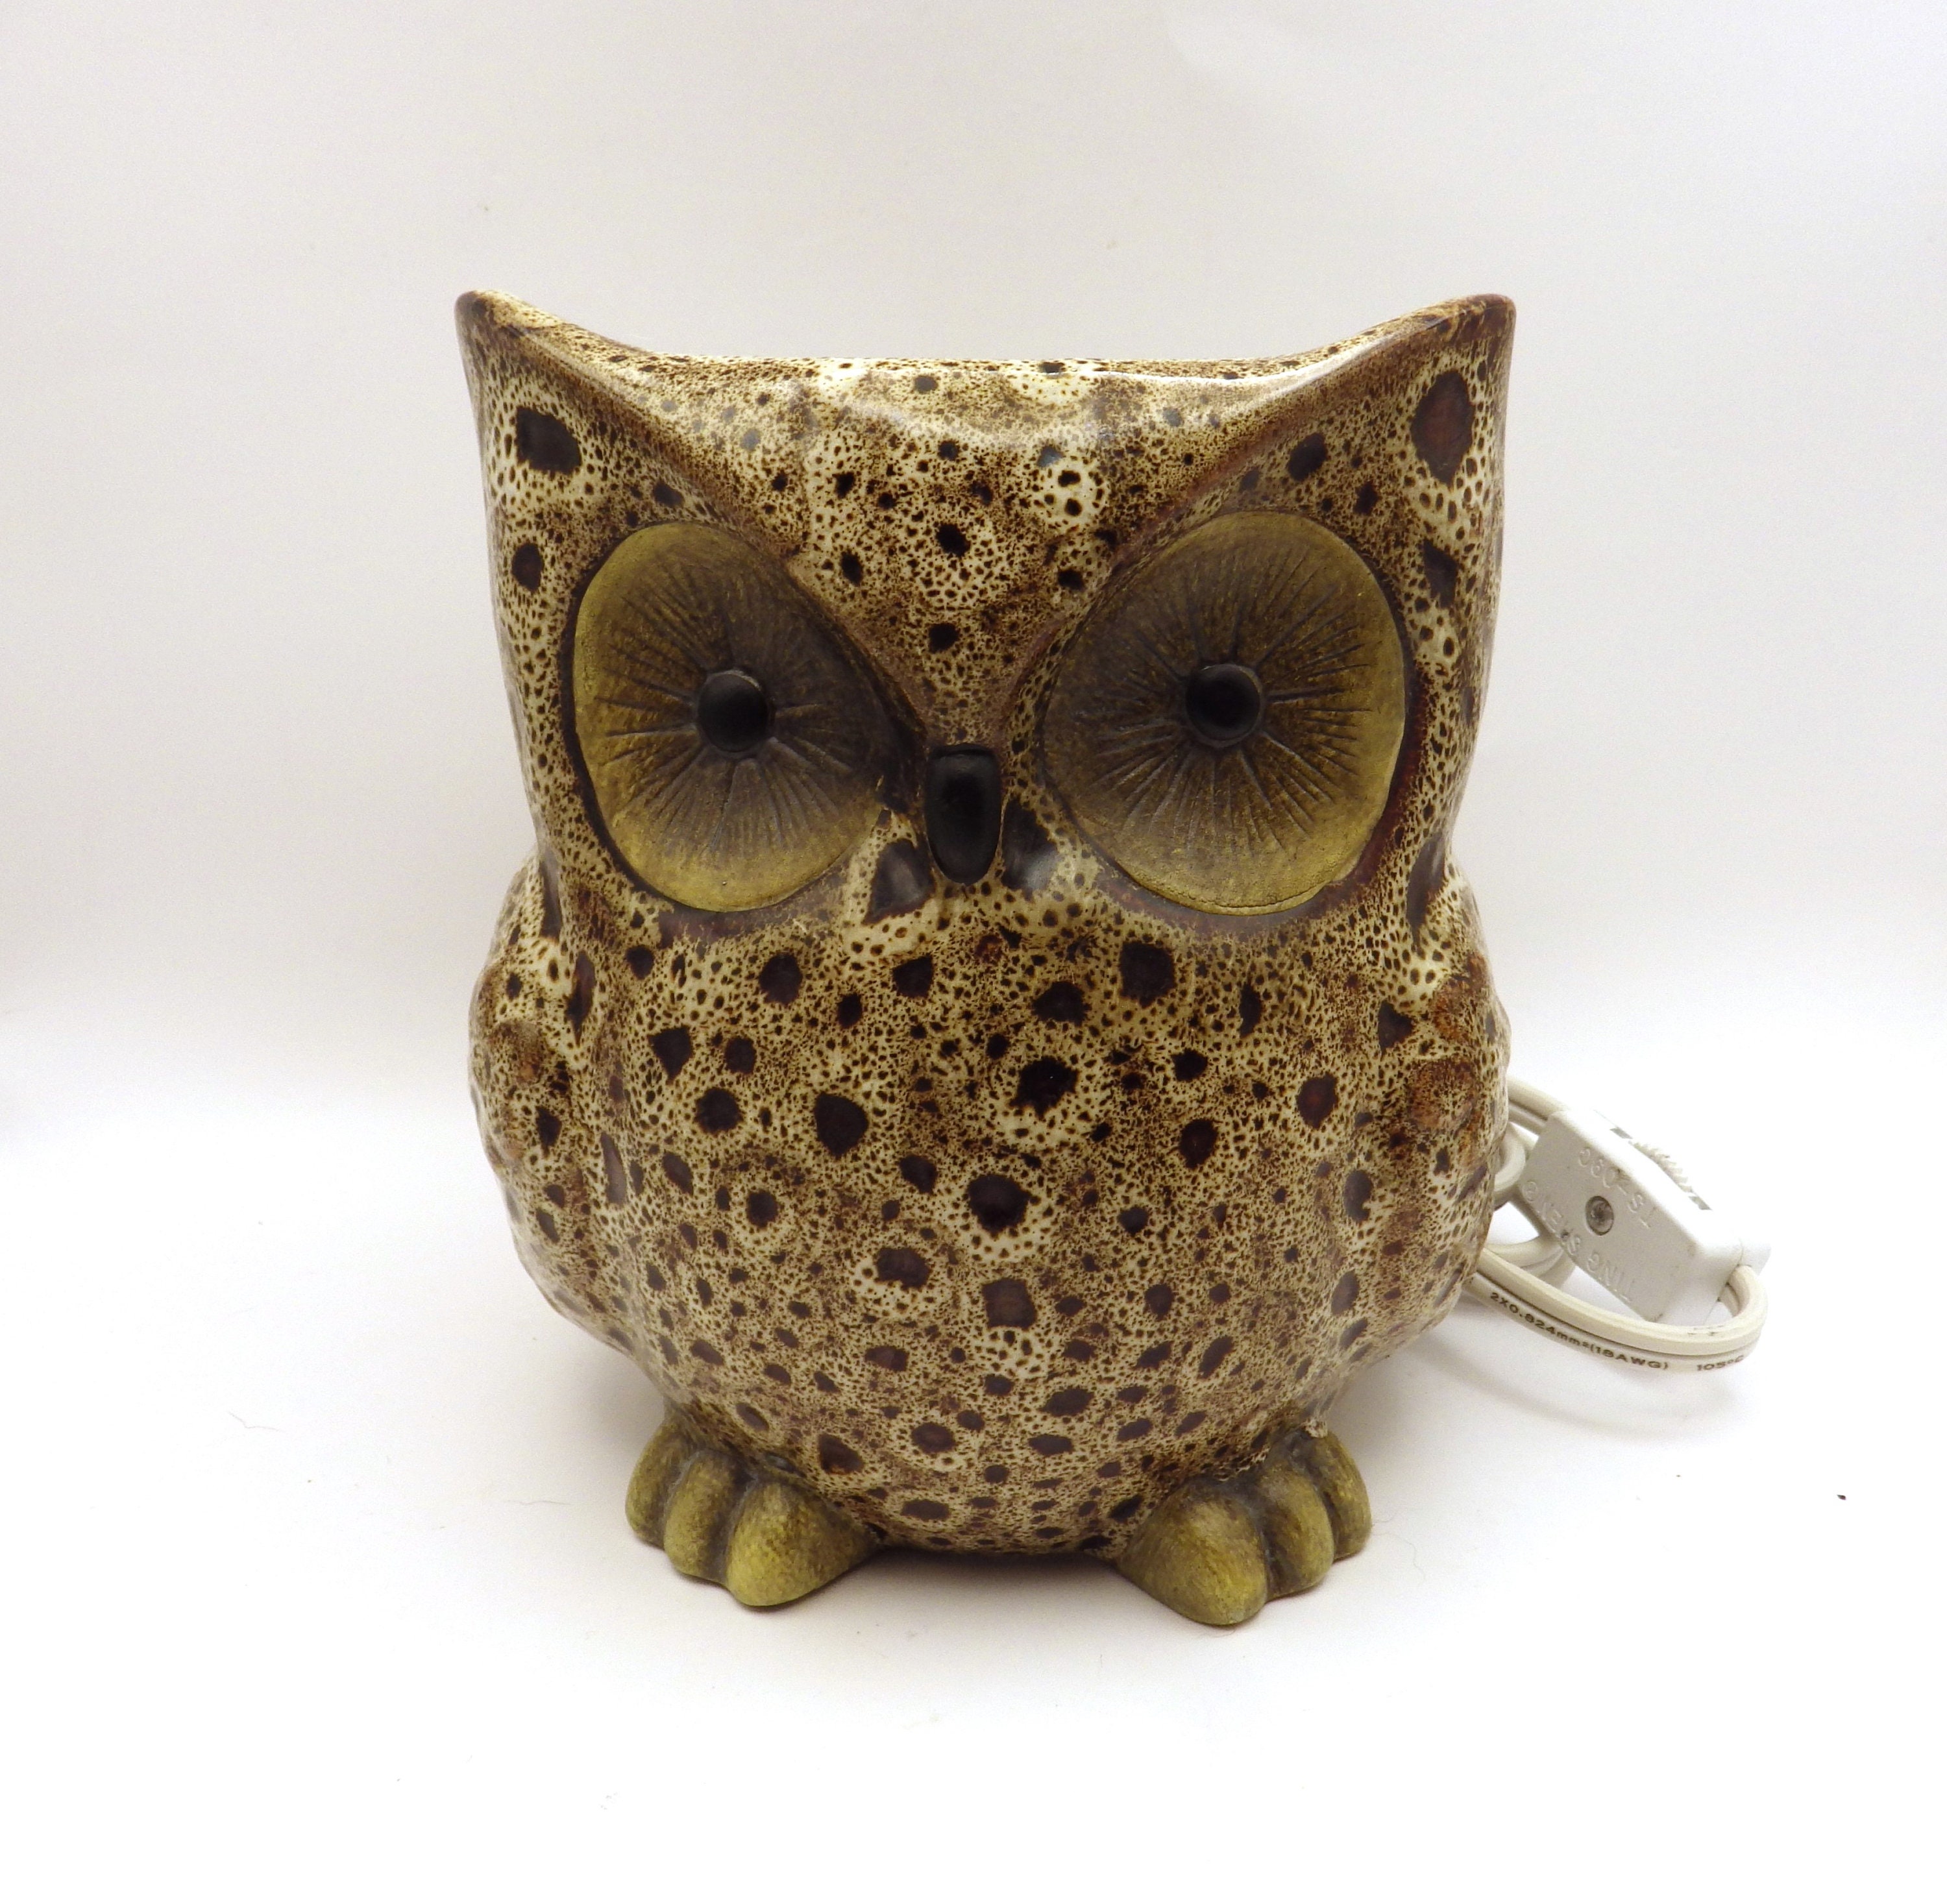 Essential Wax Thermometer 127mm Stem - Cosy Owl